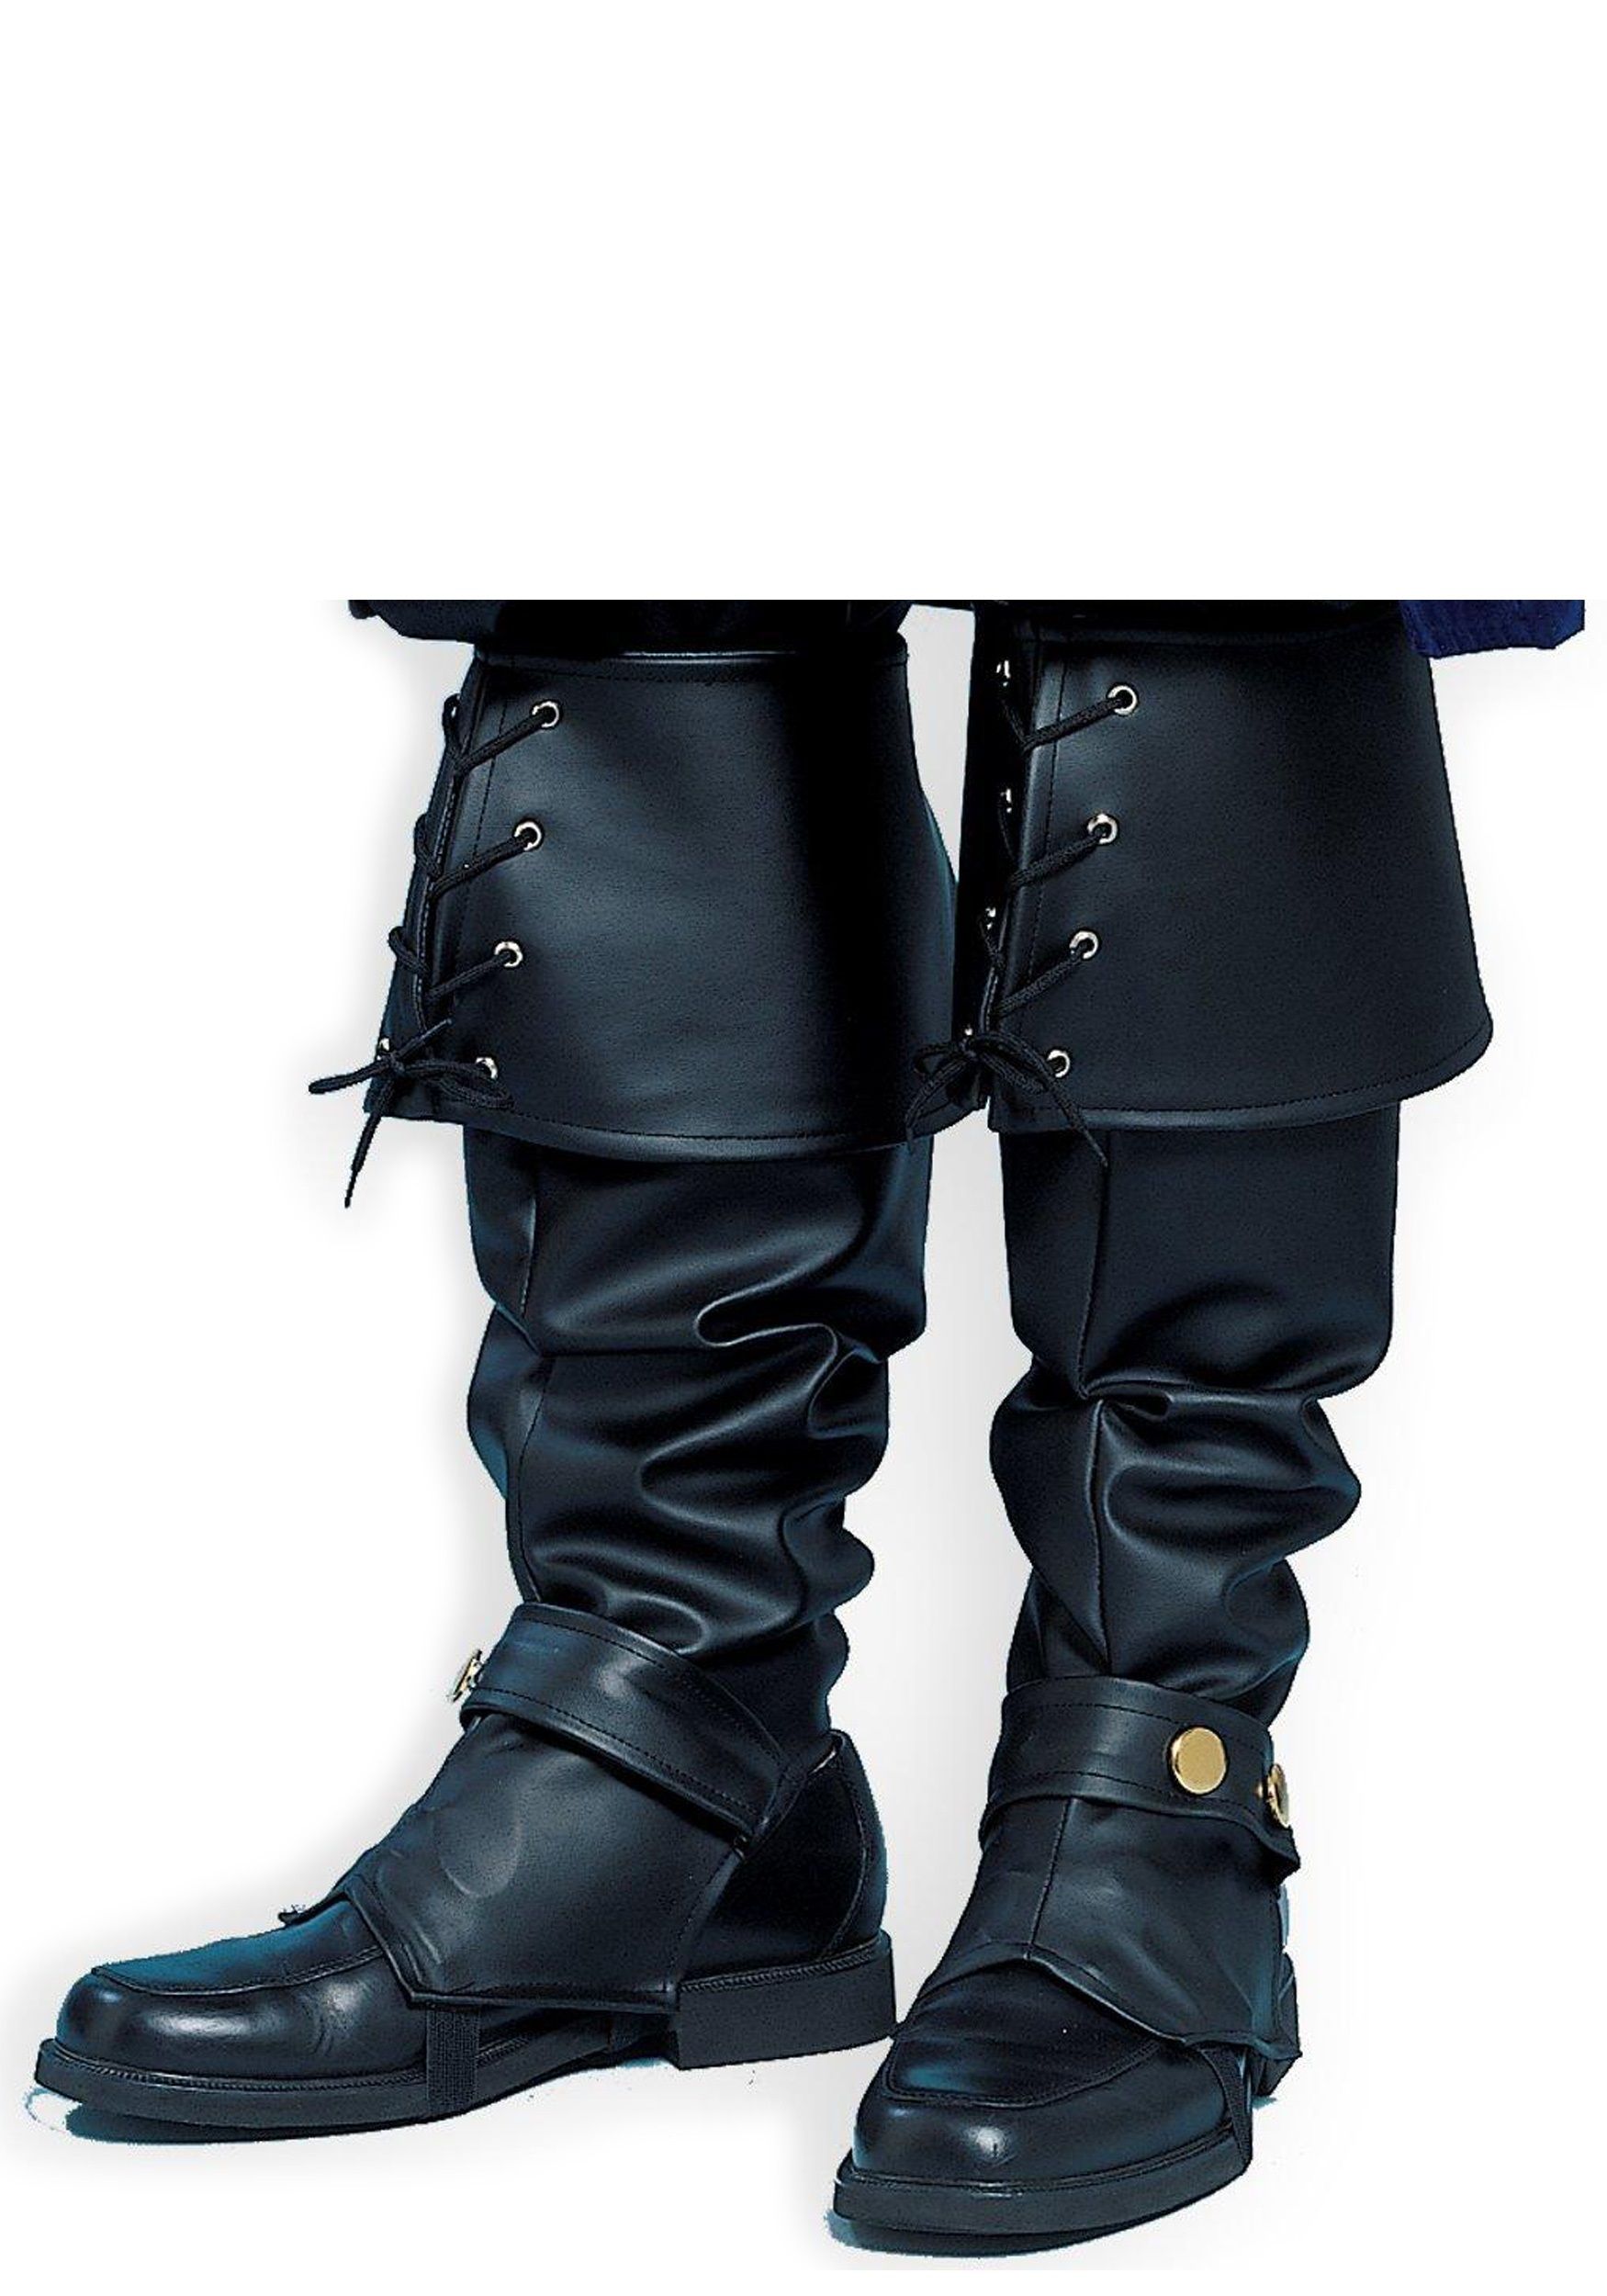 Mad D. reccomend Adult jack sparrow boot pirate covers